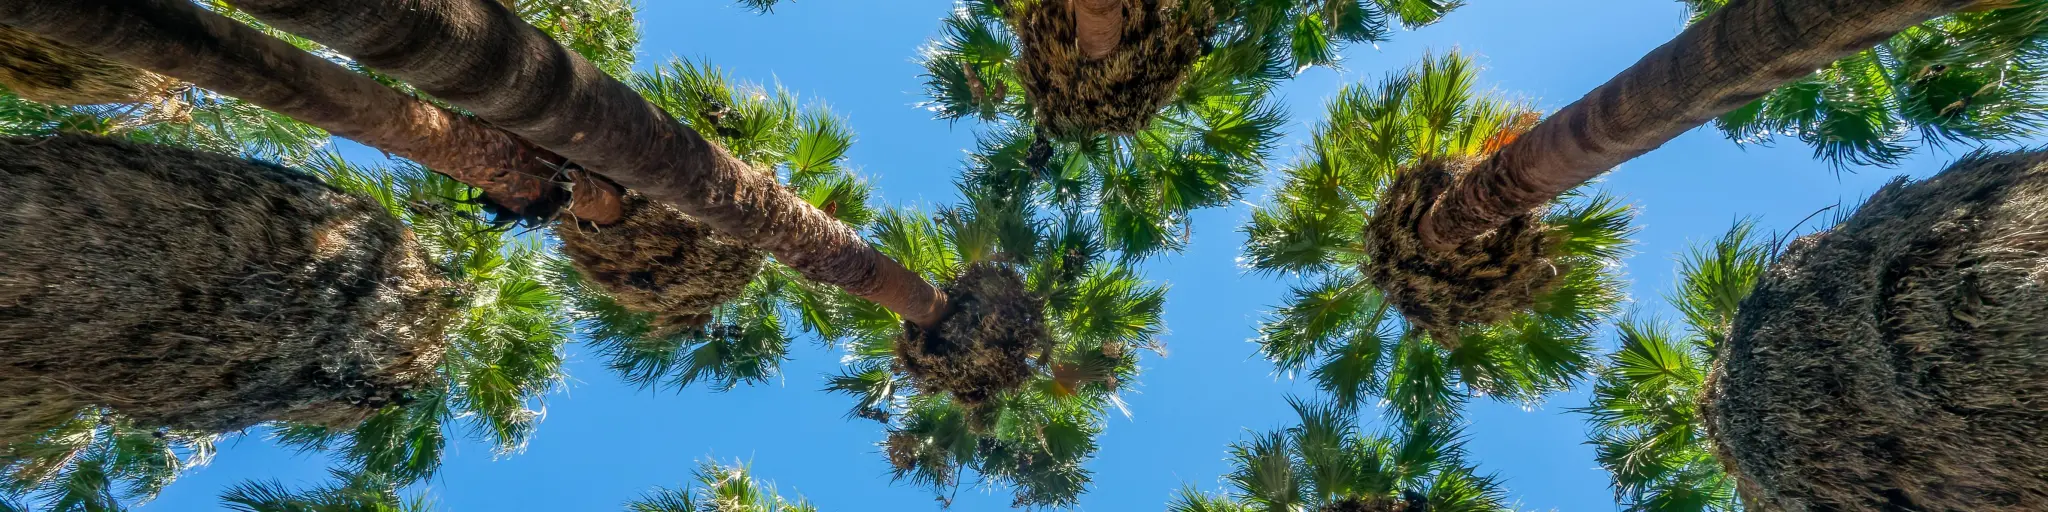 Looking up at native California palm trees in Indian Canyons, Palm Springs